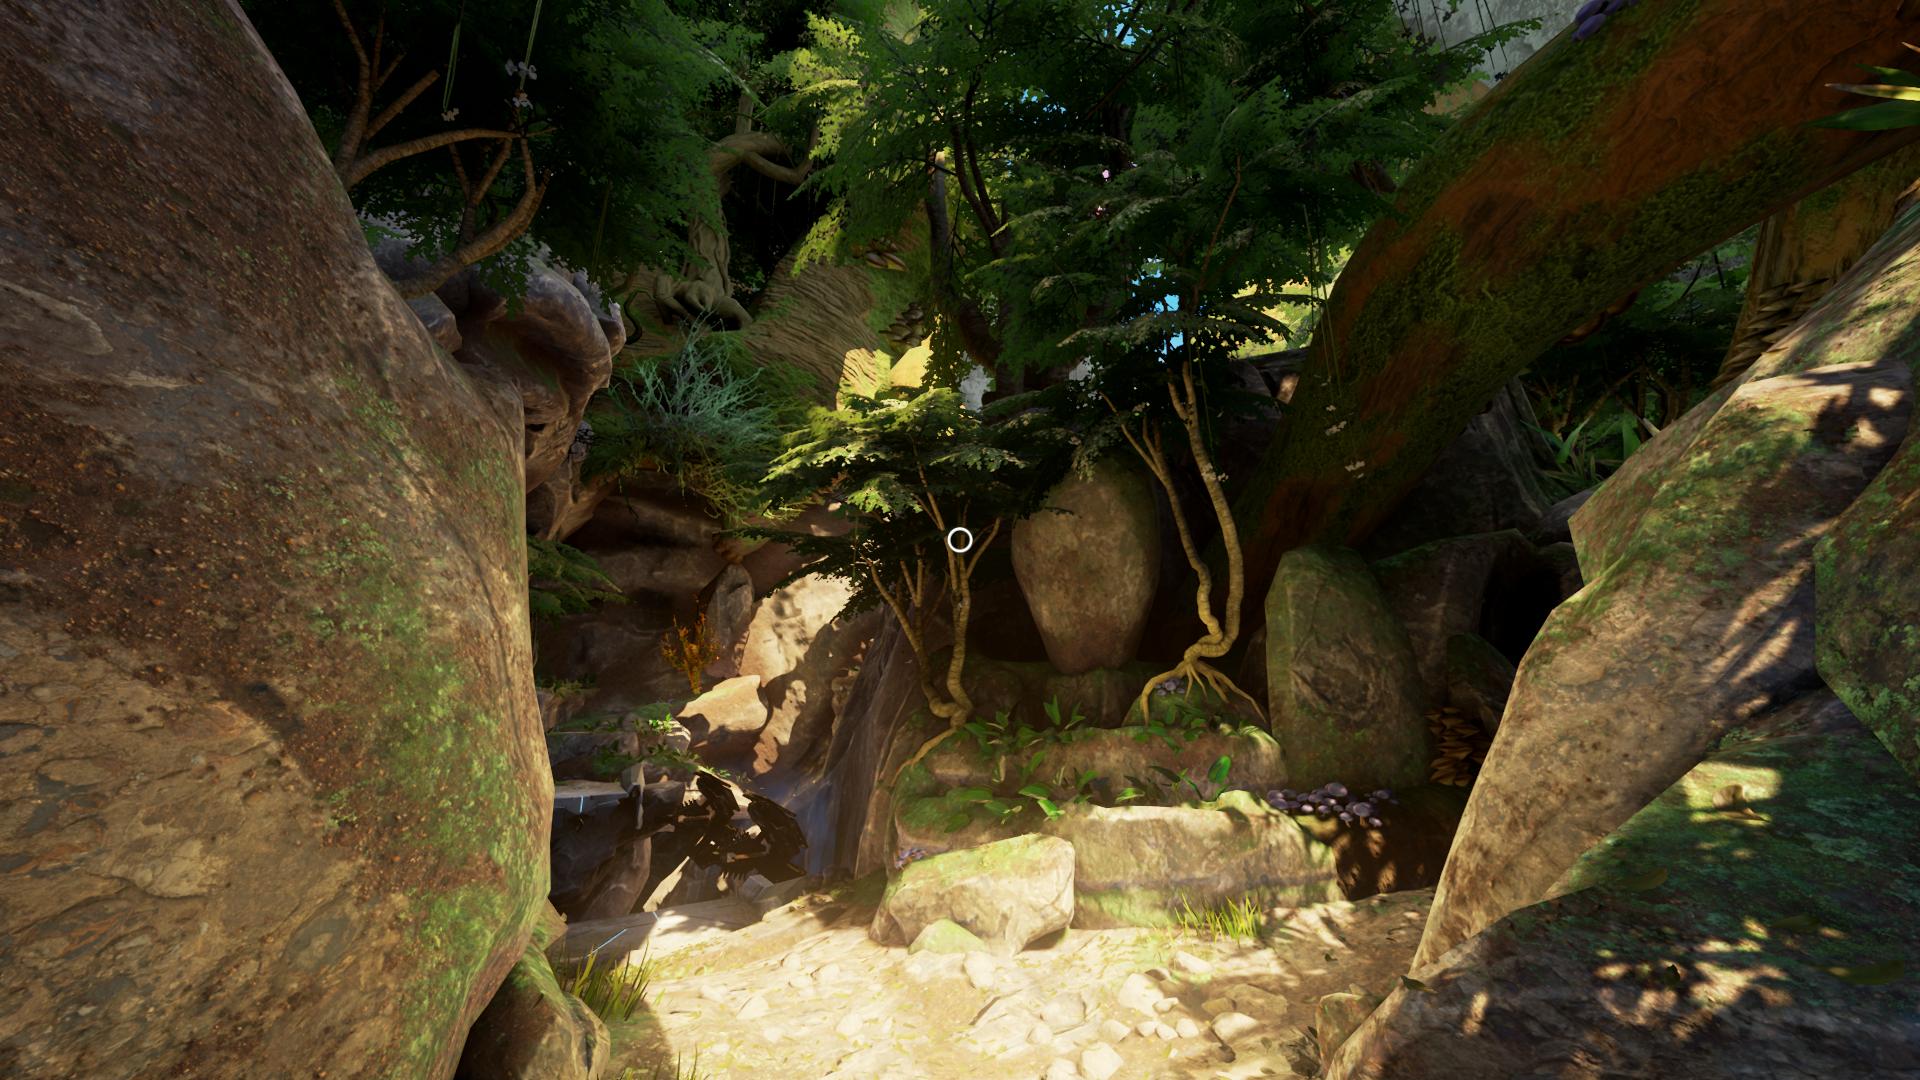 obduction ps4 download